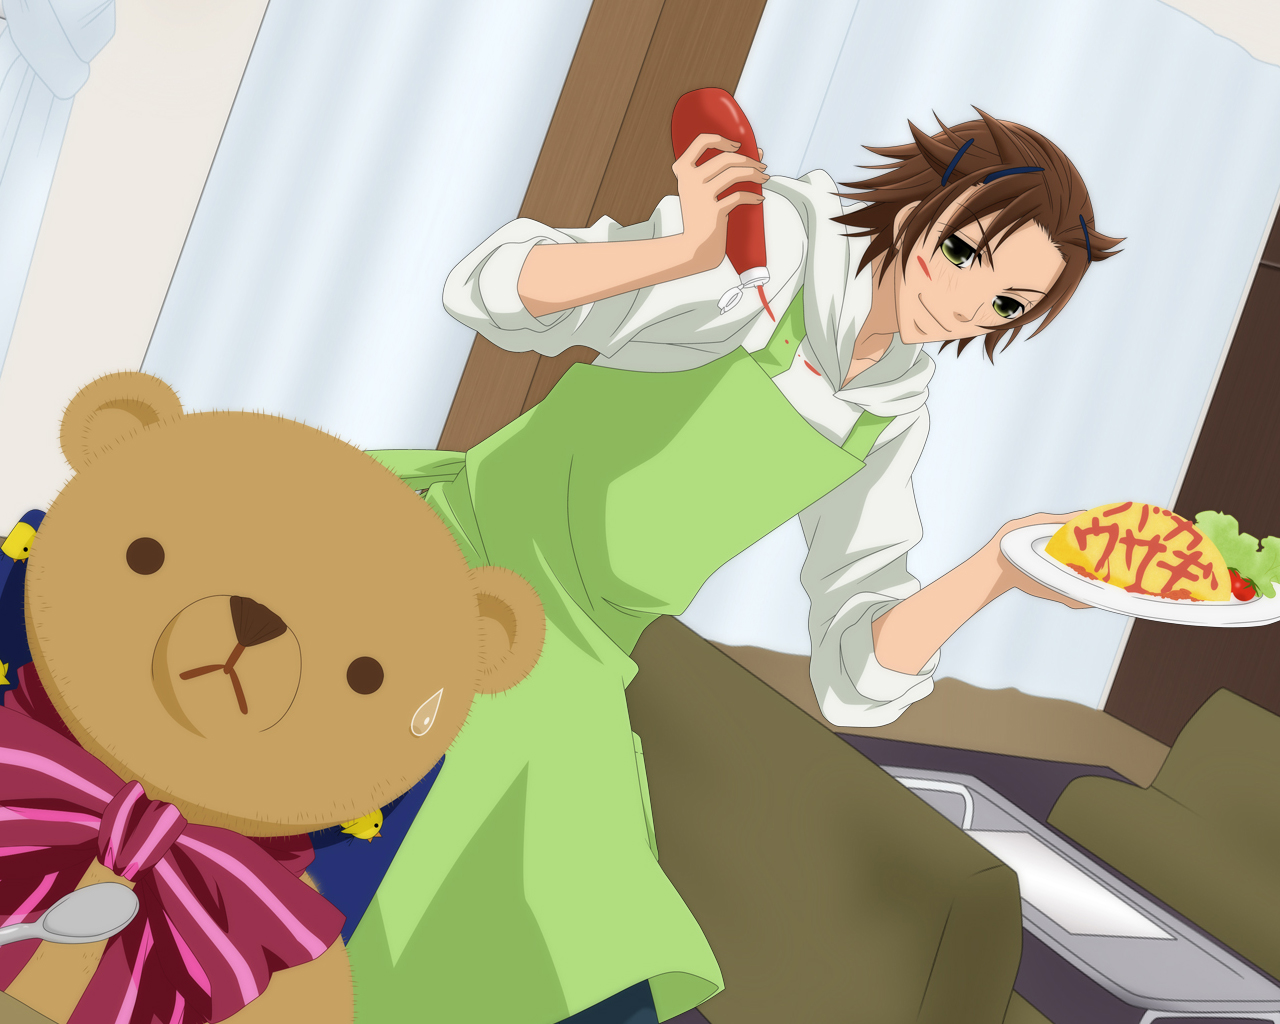 Pure Romance Wallpaper Bear Is Afraid Of Eating With Ketchup Which